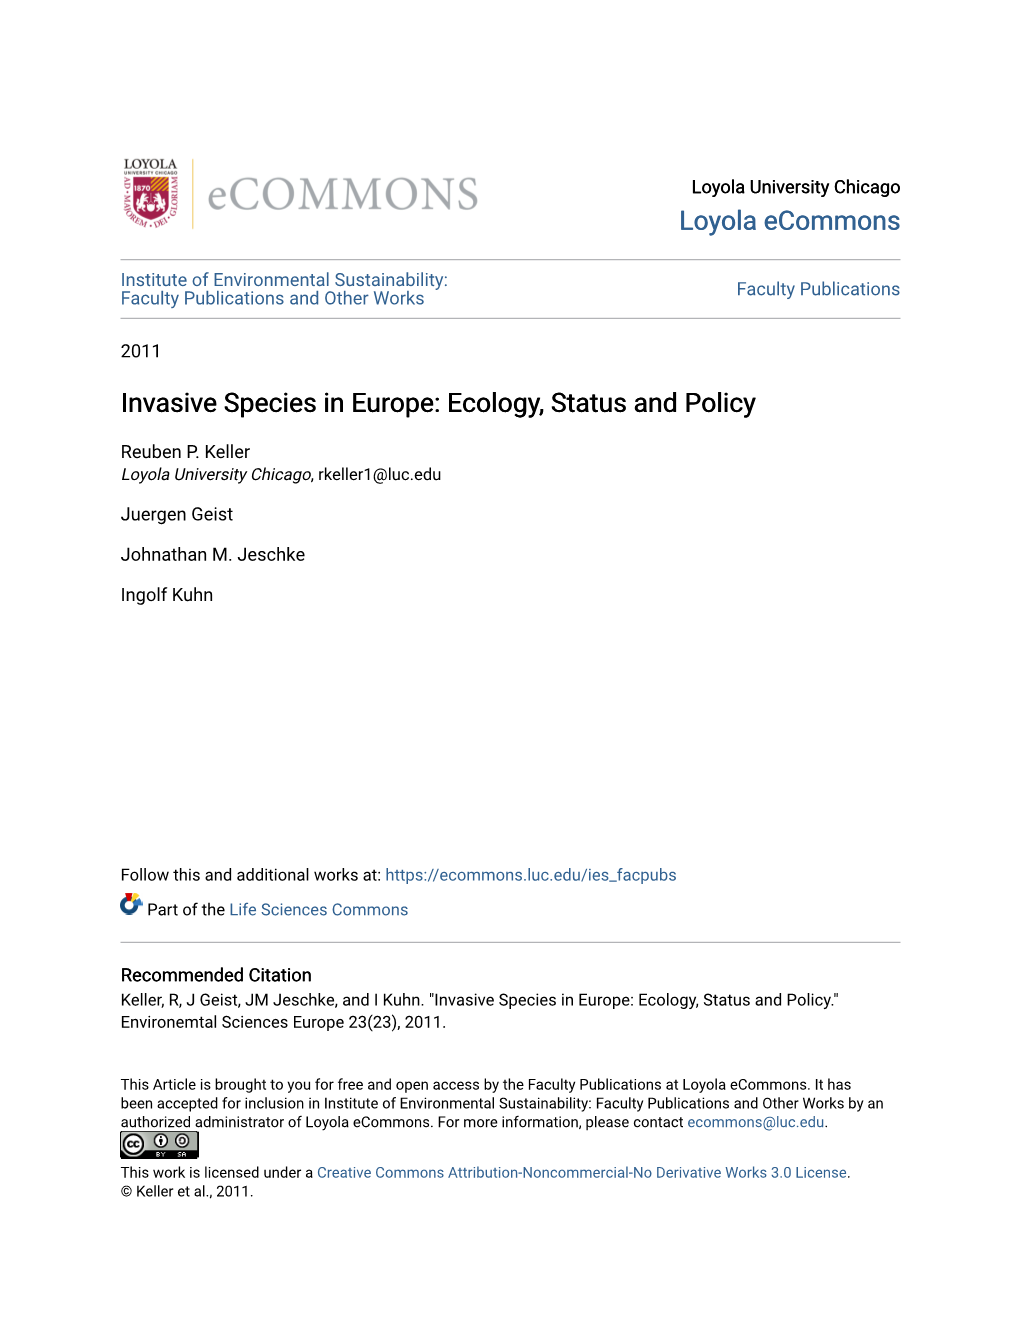 Invasive Species in Europe: Ecology, Status and Policy